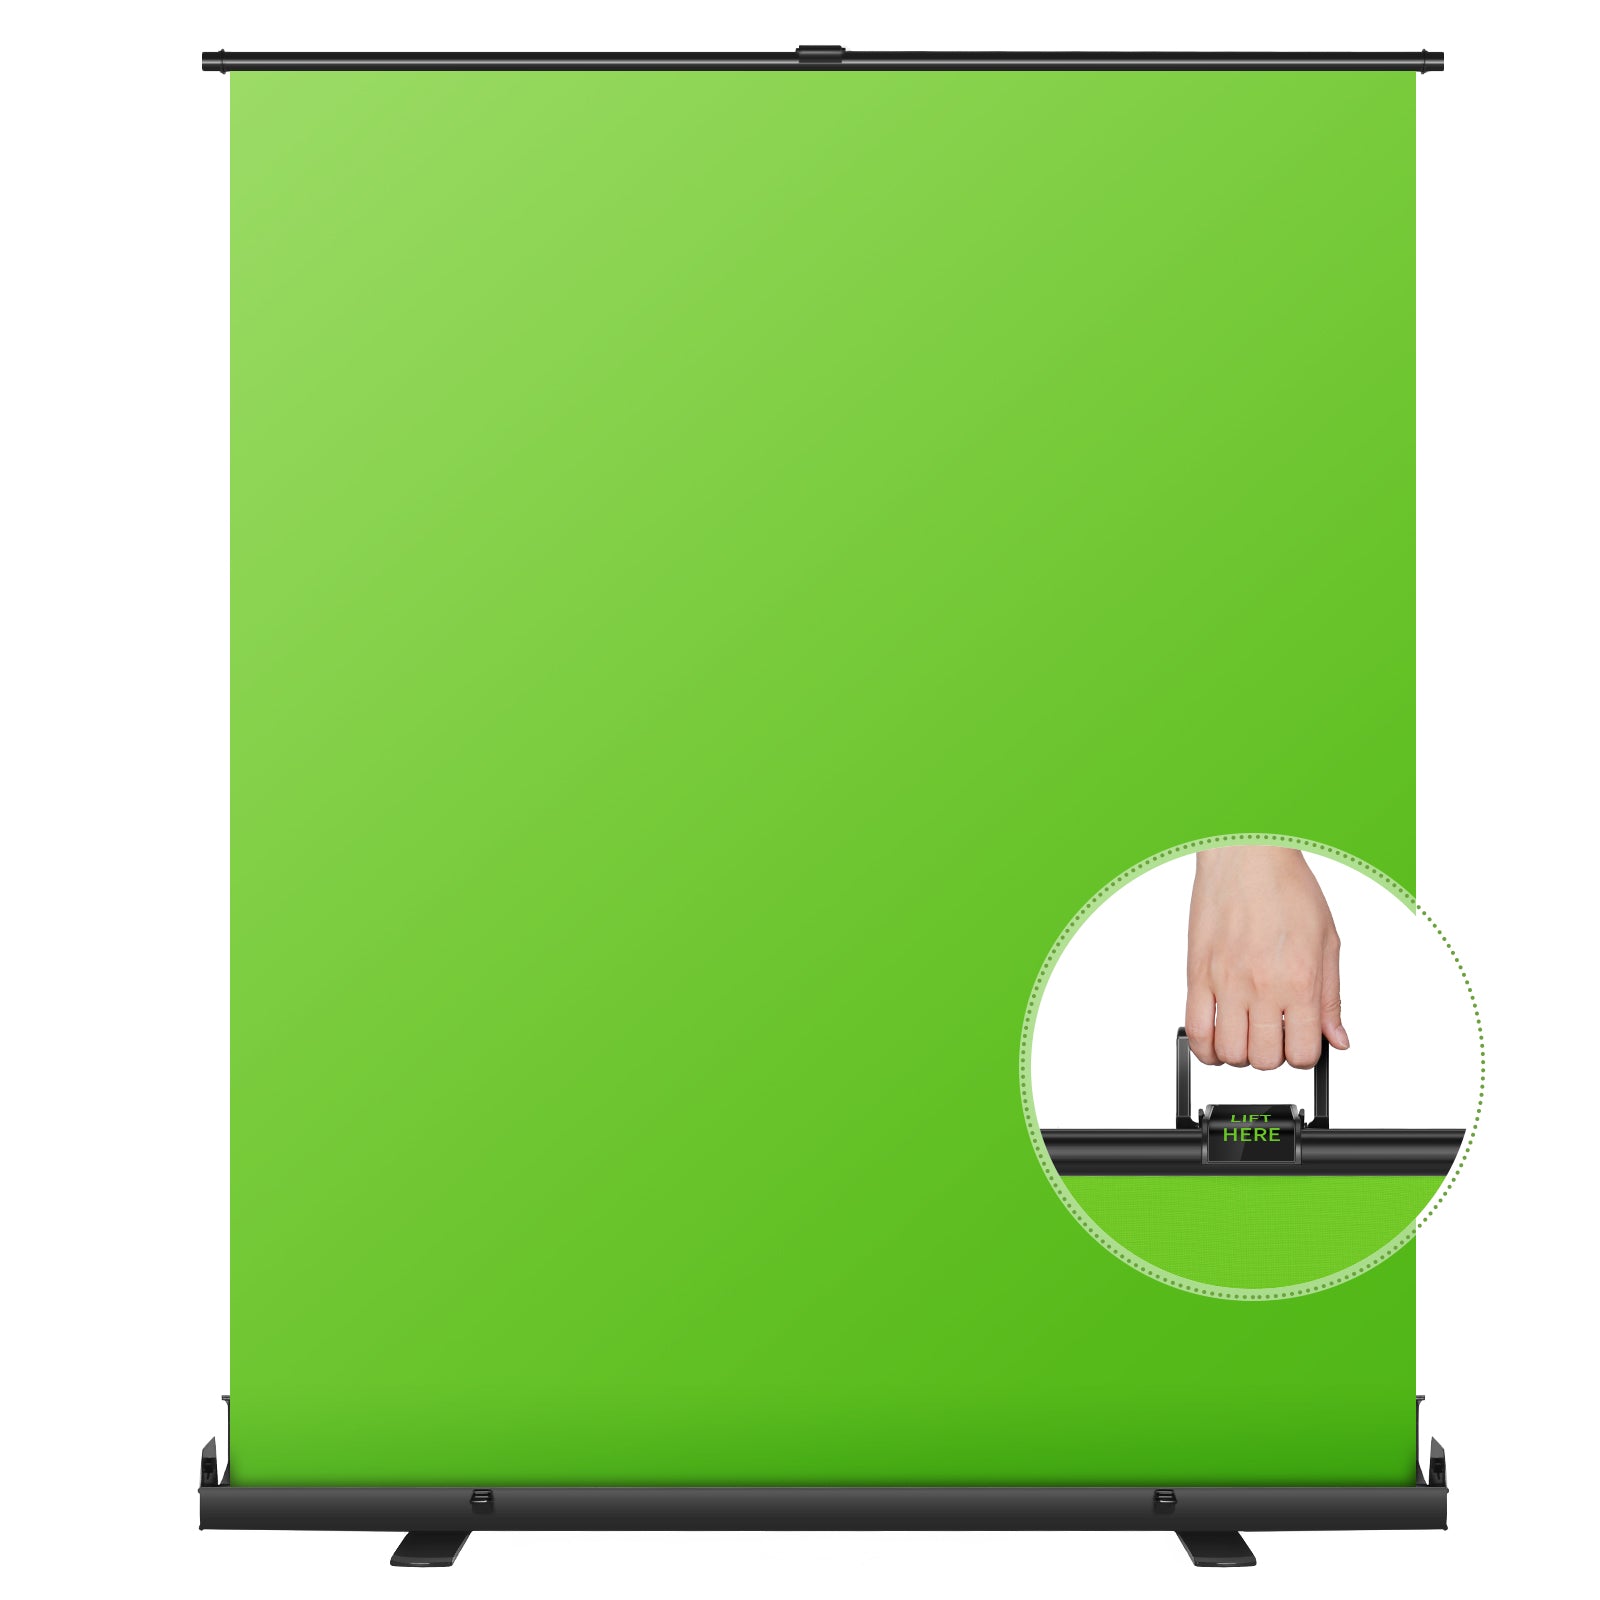 NEEWER 1.52 x1.97M Pull-up Style Backdrop - NEEWER